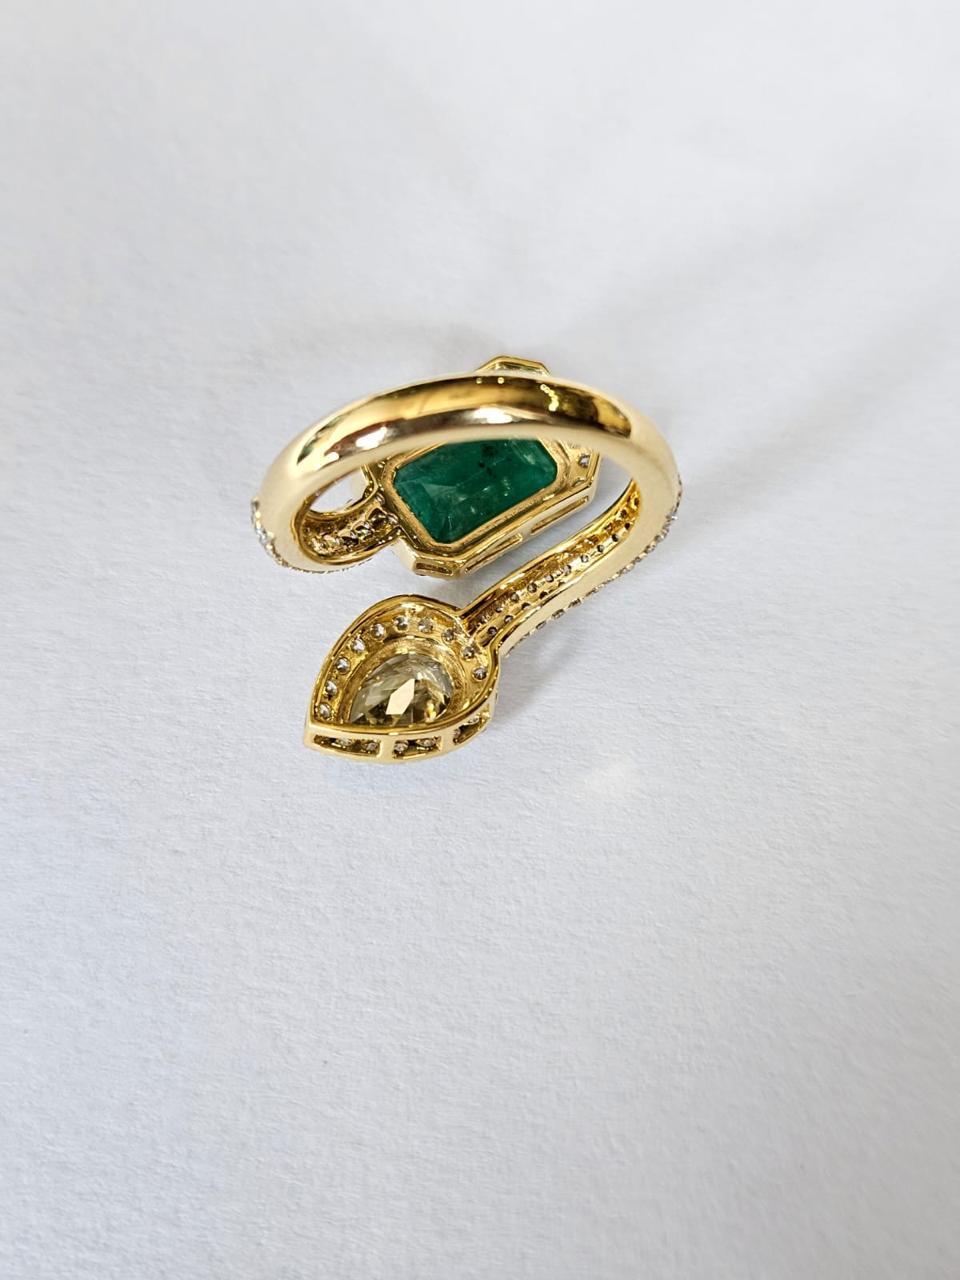 Modern Set in 18K Gold, 2.34 carats, natural Zambian Emerald & Diamonds Engagement Ring For Sale